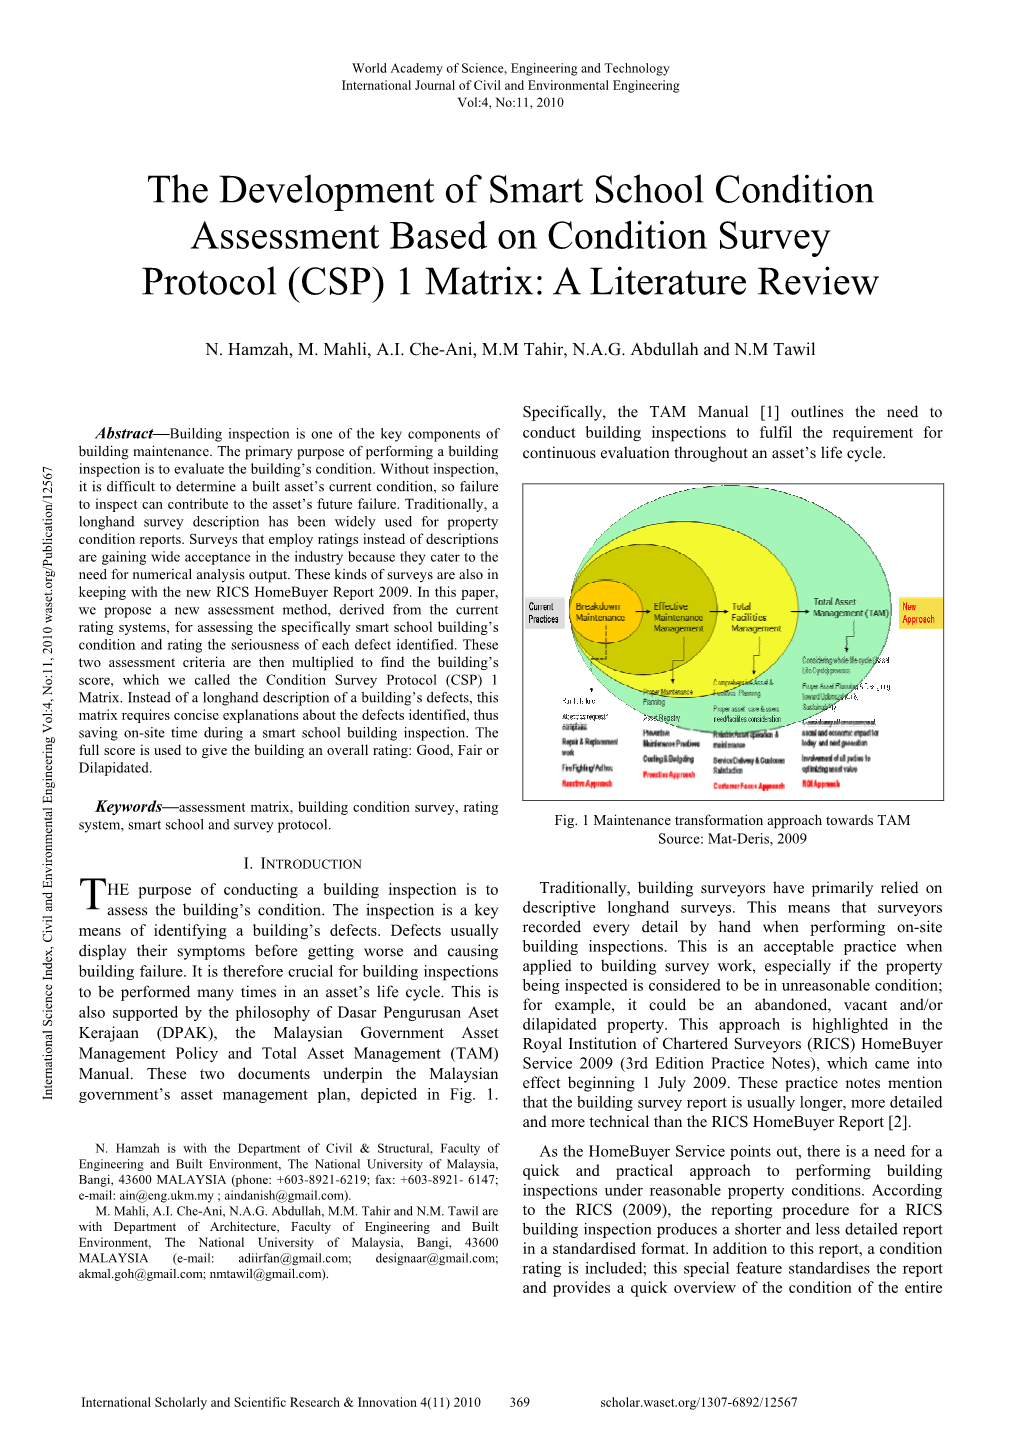 The Development of Smart School Condition Assessment Based on Condition Survey Protocol (CSP) 1 Matrix: a Literature Review